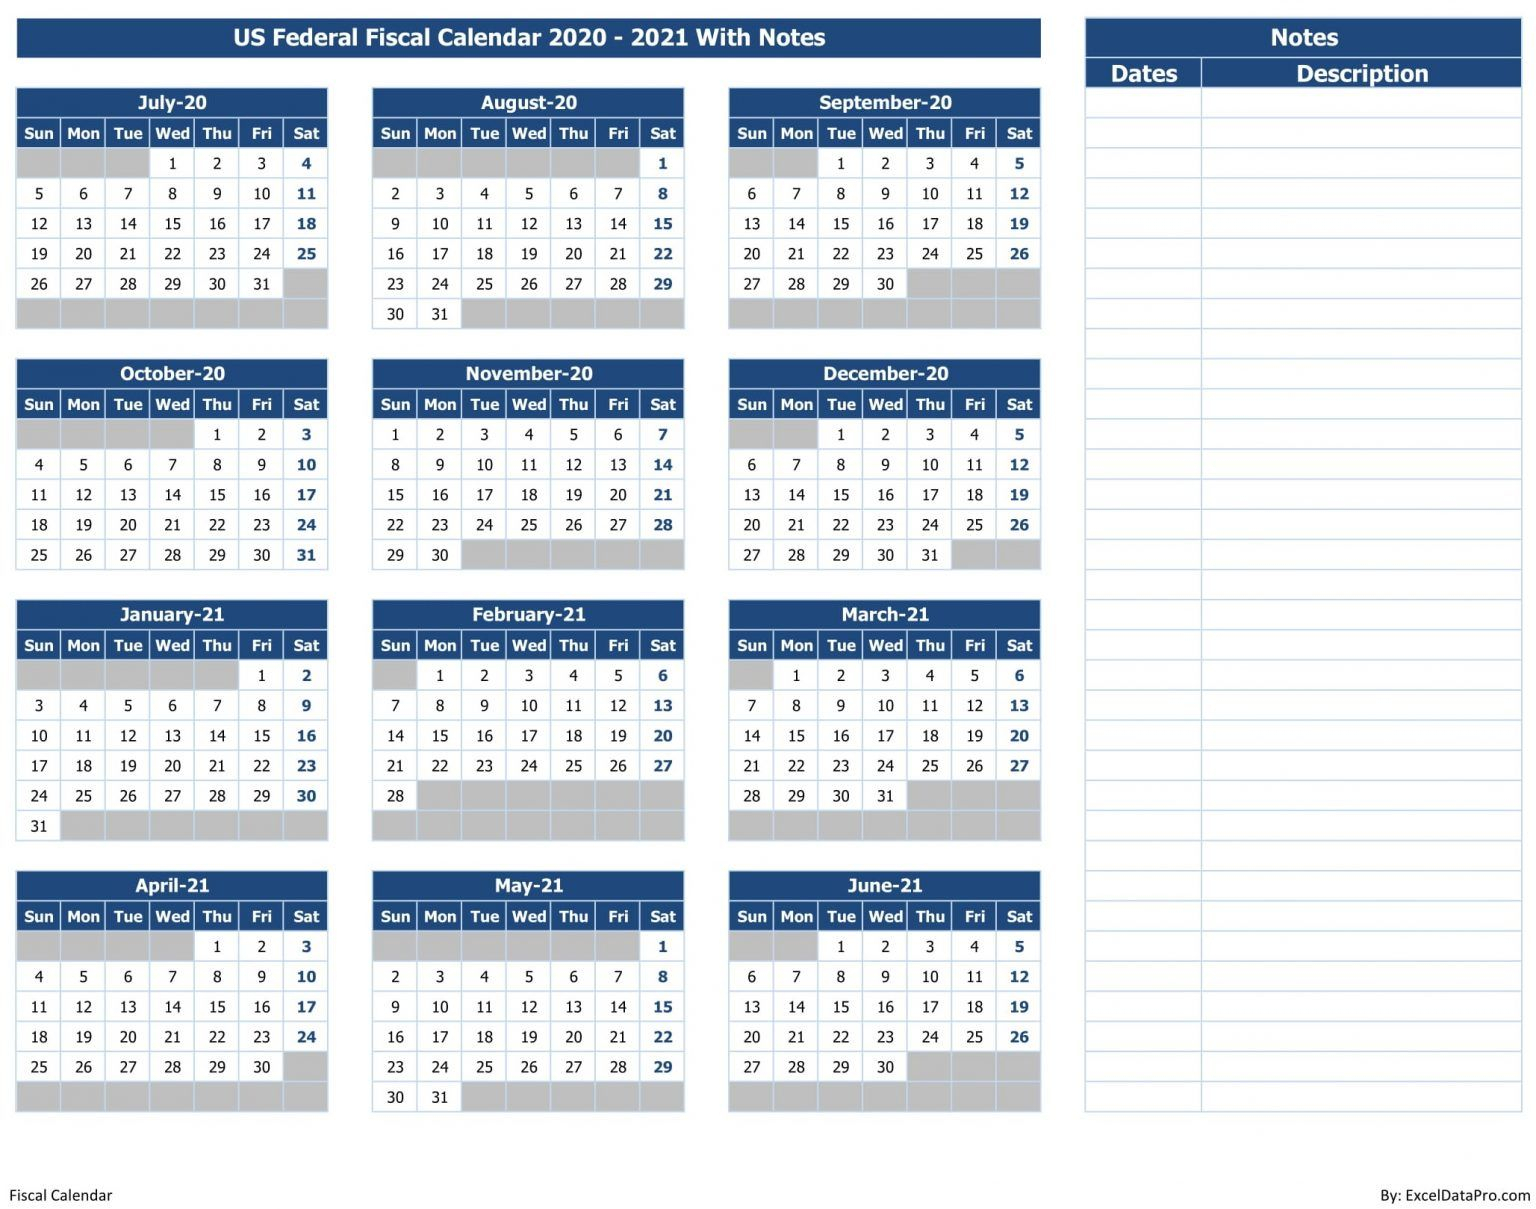 Download Us Federal Fiscal Calendar 2020-21 With Notes